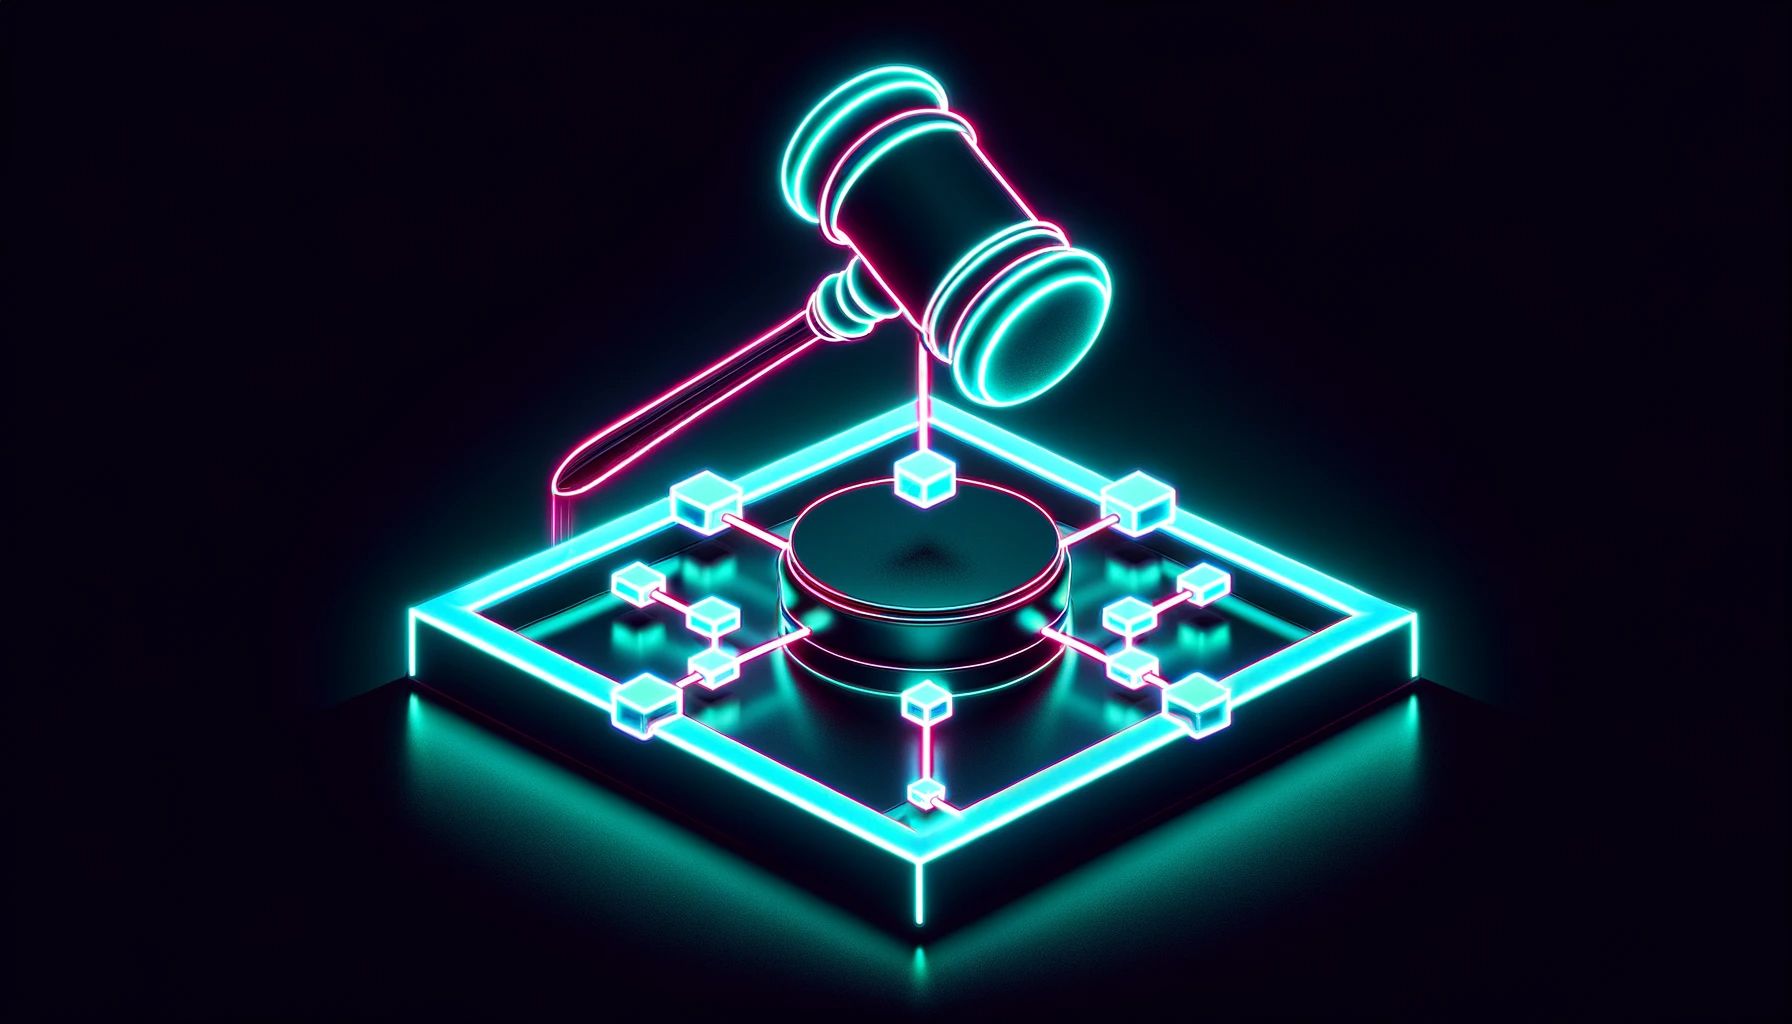 Prominent Lawyer Gabriel Shapiro Introduces Effort to Synthesize Crypto and Law - The Defiant